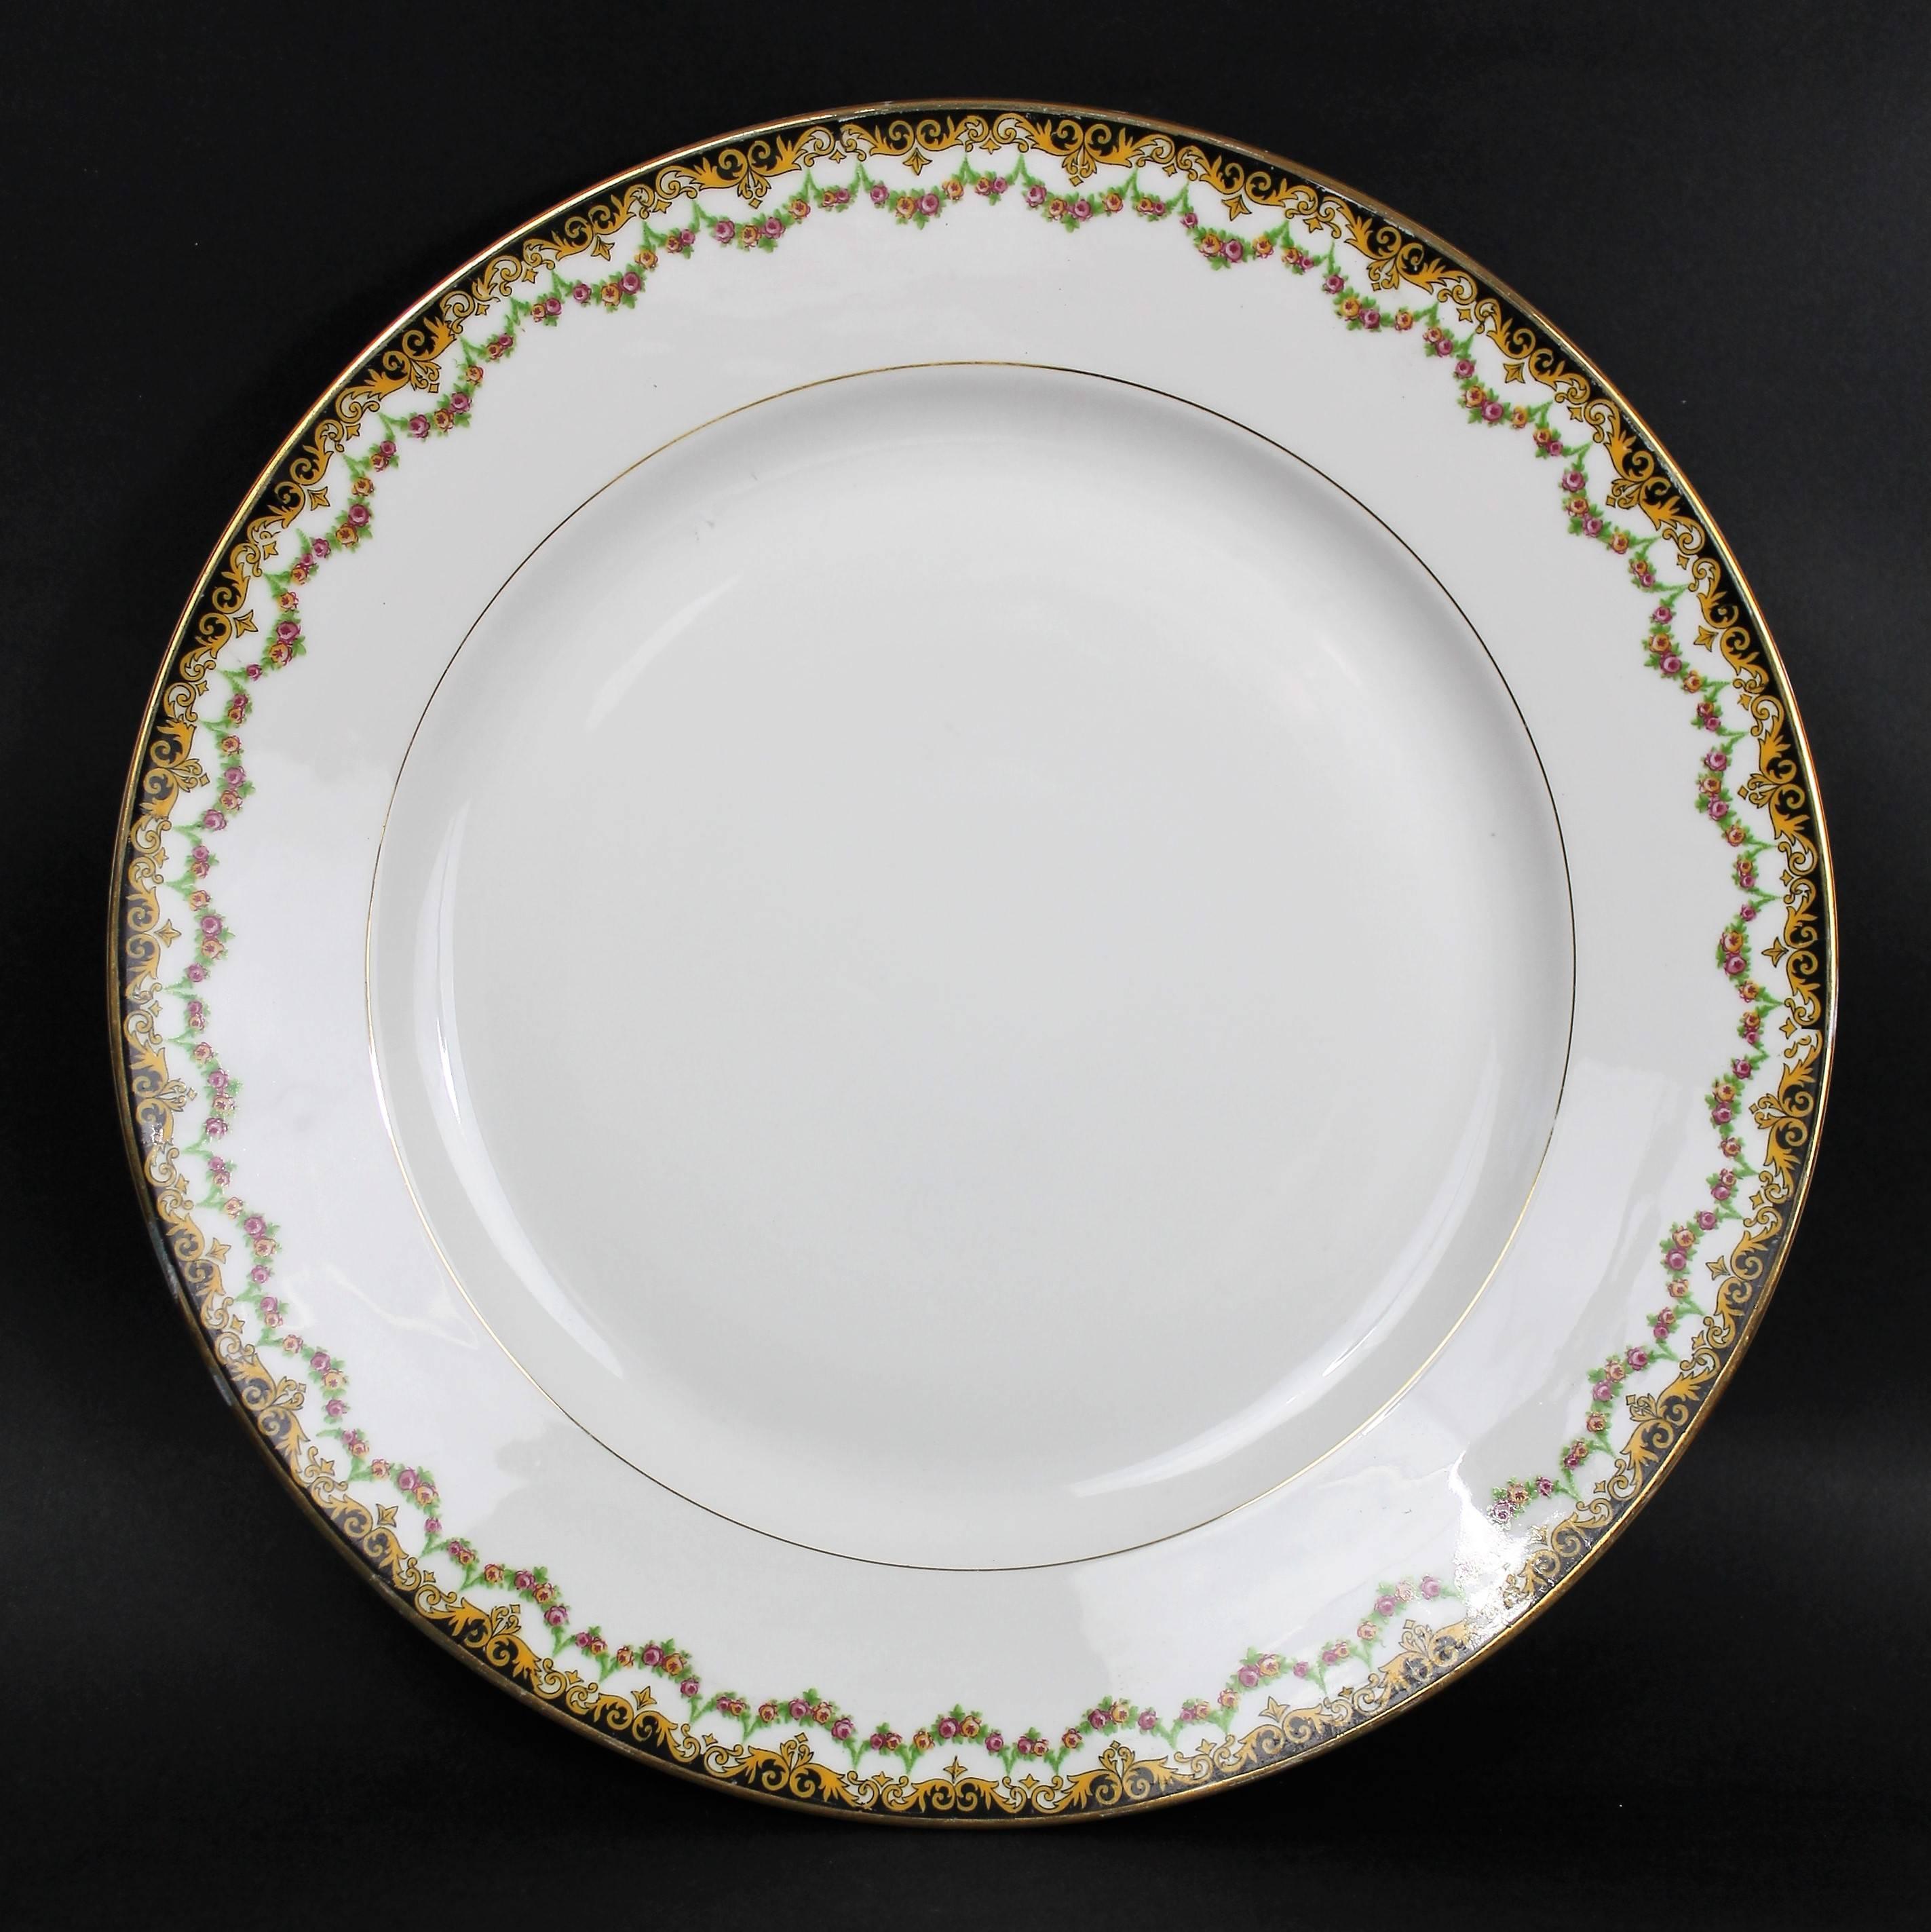 Beautiful Limoges porcelain tableware with yellow and black decoration, gilding, and garlands of flowers, comprising 67 pieces:
32 flat plates, 12 small plates, 11 soup plates, one soup tureen, one vegetable dish, two round dishes, one oval dish,